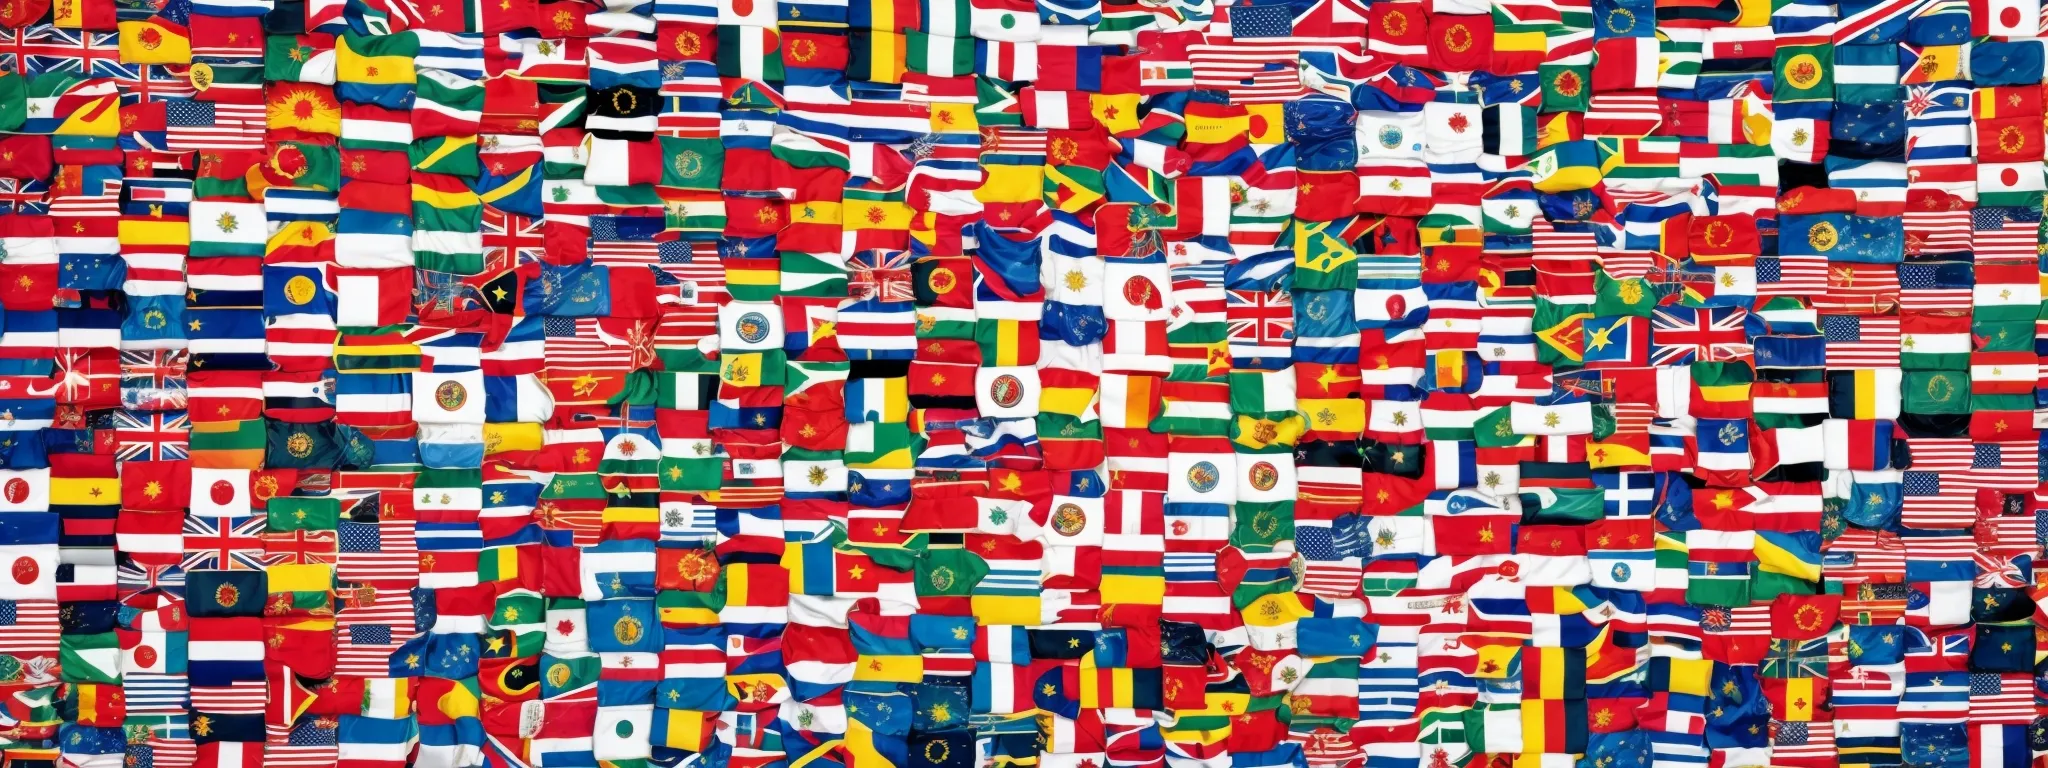 a globe surrounded by various international flags, symbolizing global web coverage and connectivity.